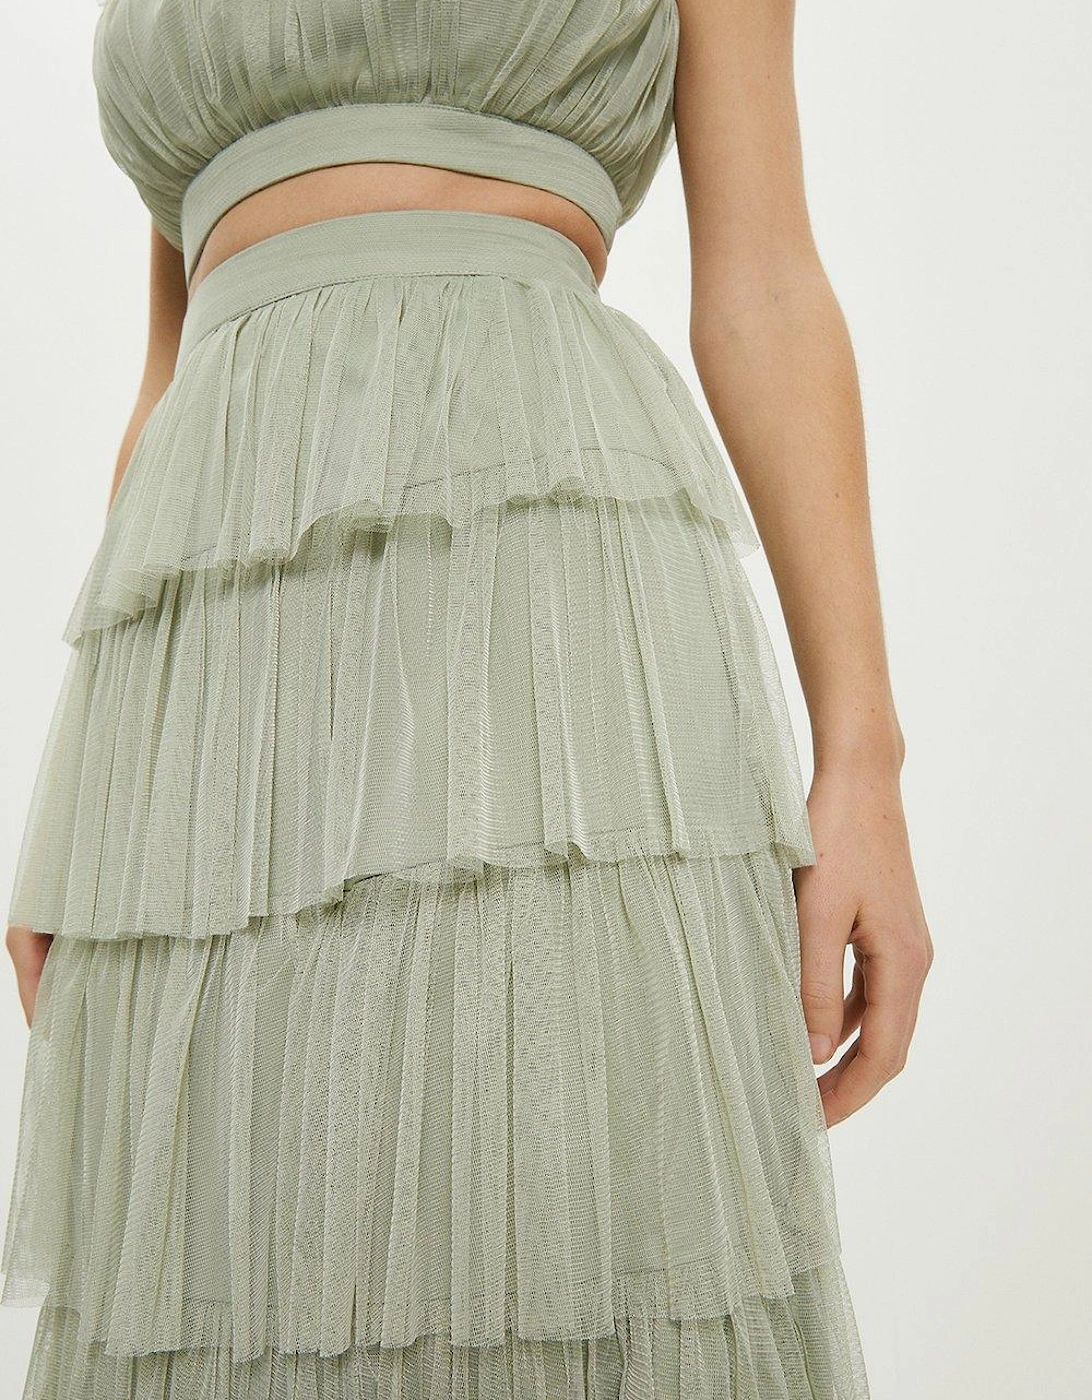 All Over Tiered Tulle Skirt